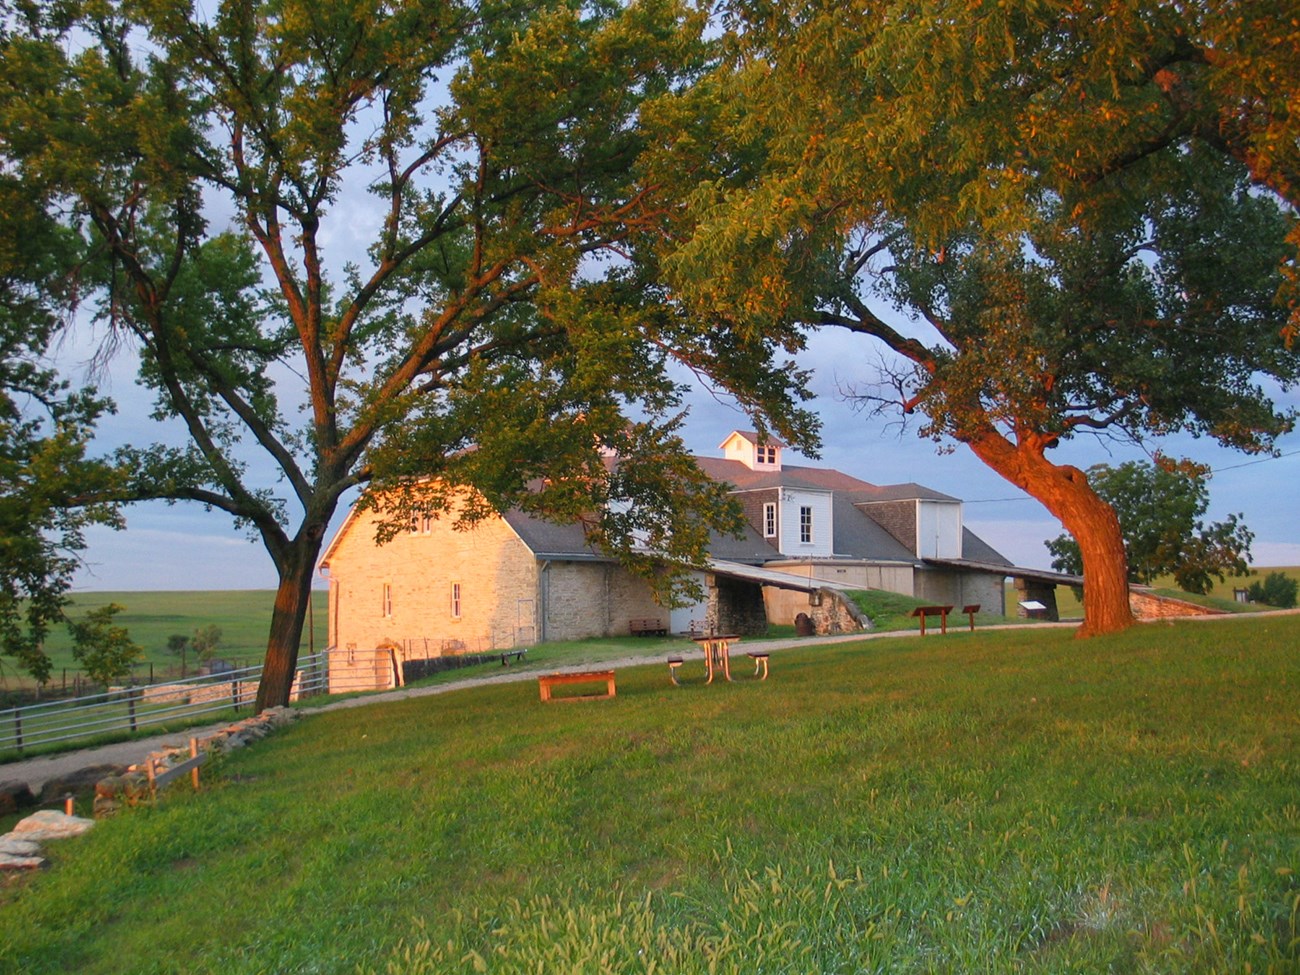 Lawn with picnic table, trees and road with limestone barn behind at sunrise